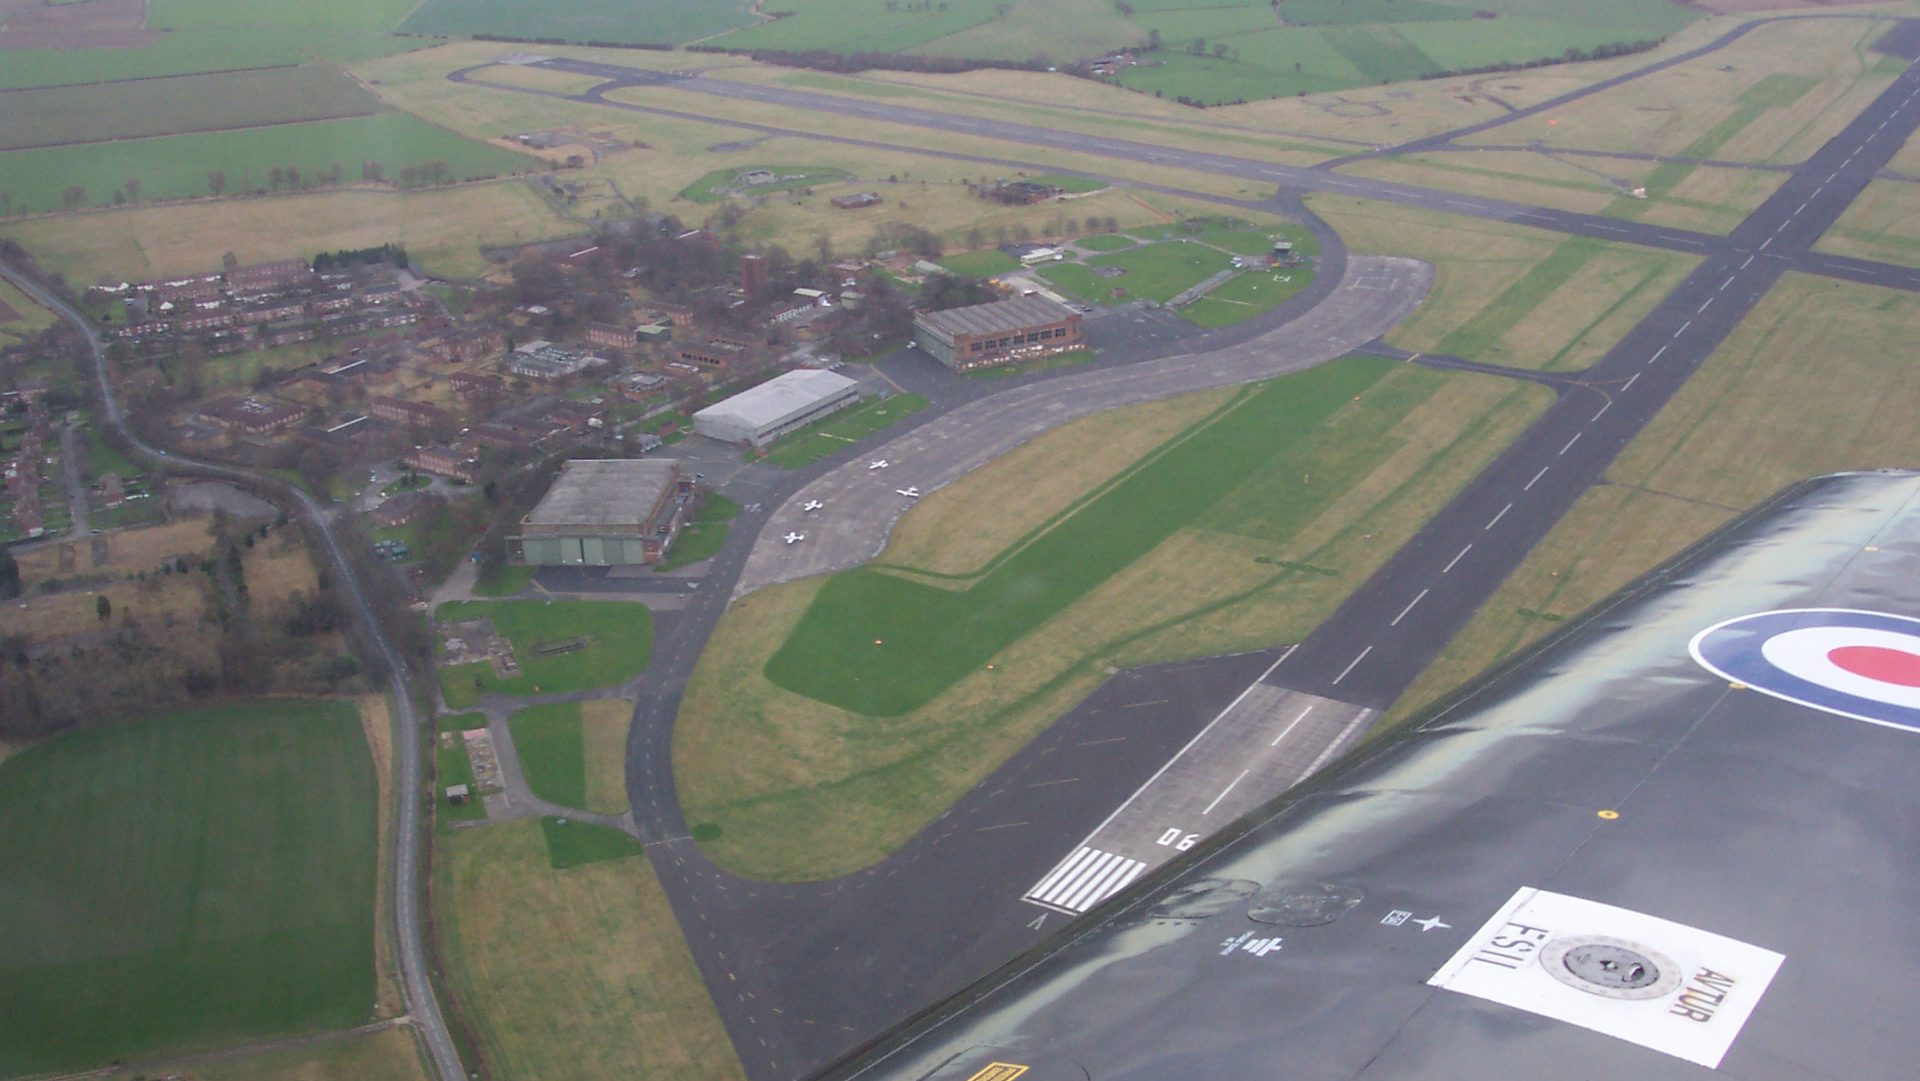 Major changes to University Air Squadron structure and RAF Elementary Flying Training